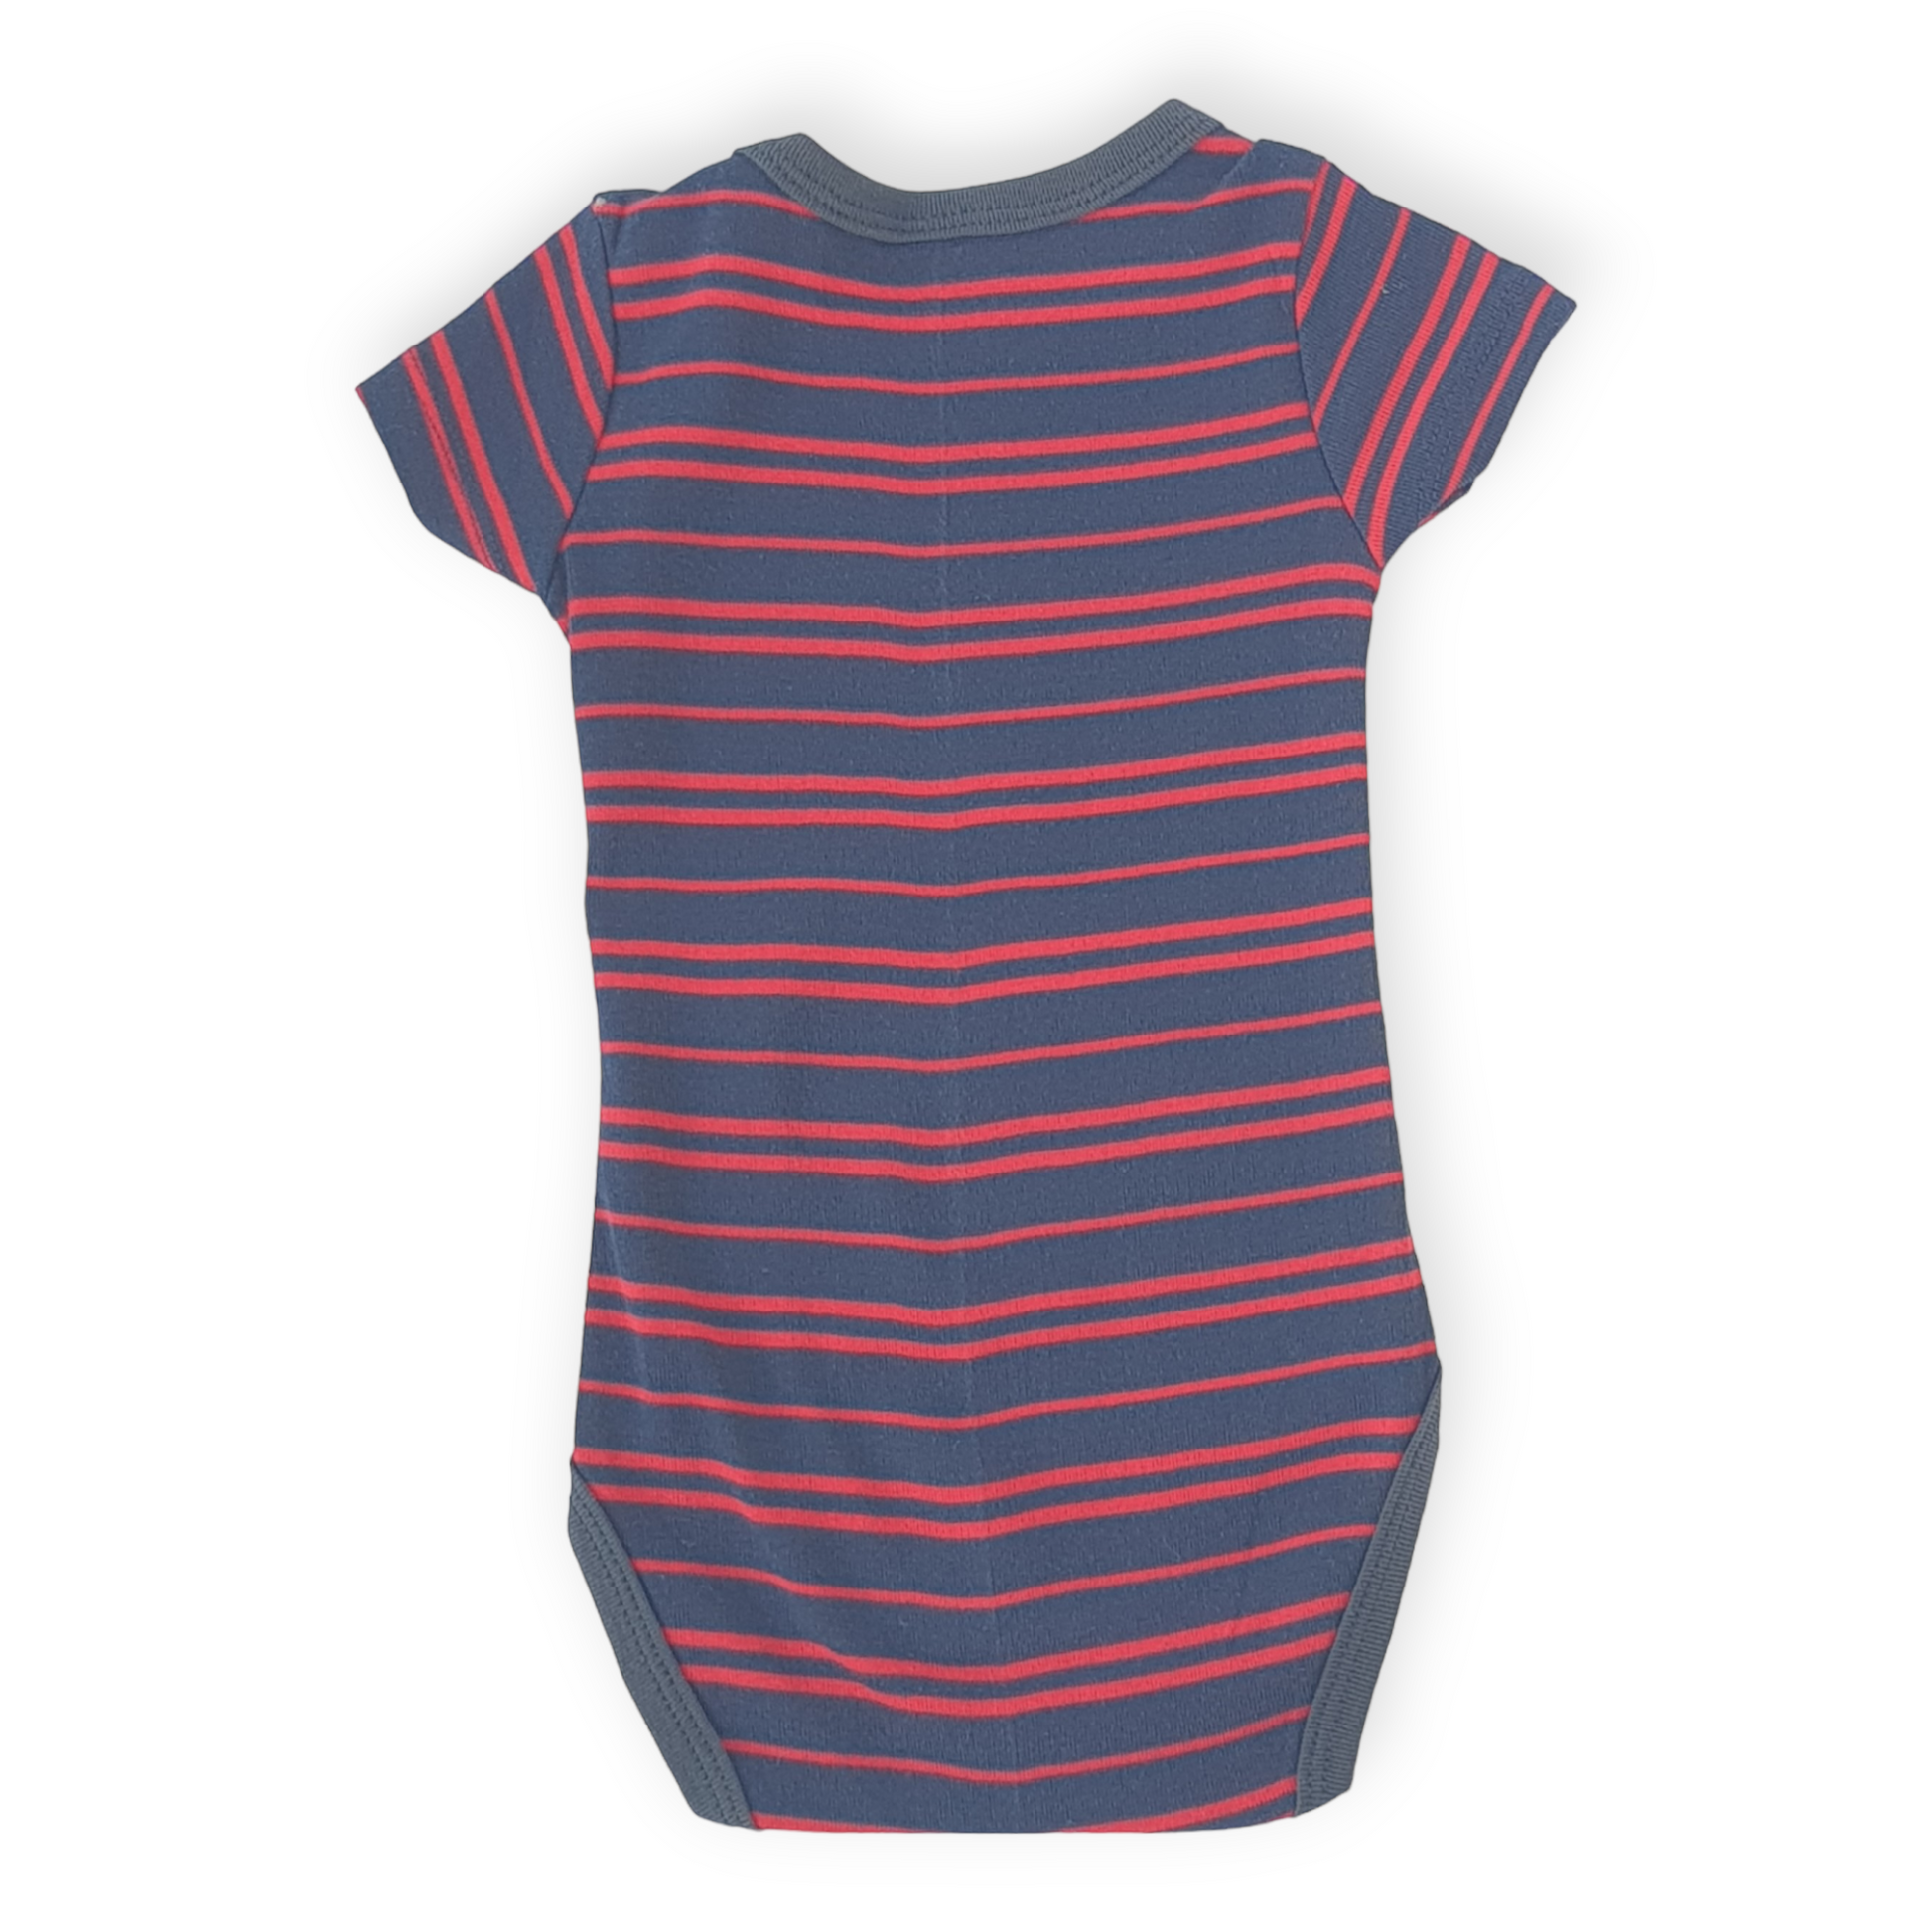 Navy and Red Striped Unisex Body-Blue, Body, Bodysuit, Boy, Catboy, Catgirl, Catunisex, Creeper, Girl, Navy, Onesie, Red, Short Sleeve, SS23-Fuar Baby-[Too Twee]-[Tootwee]-[baby]-[newborn]-[clothes]-[essentials]-[toys]-[Lebanon]